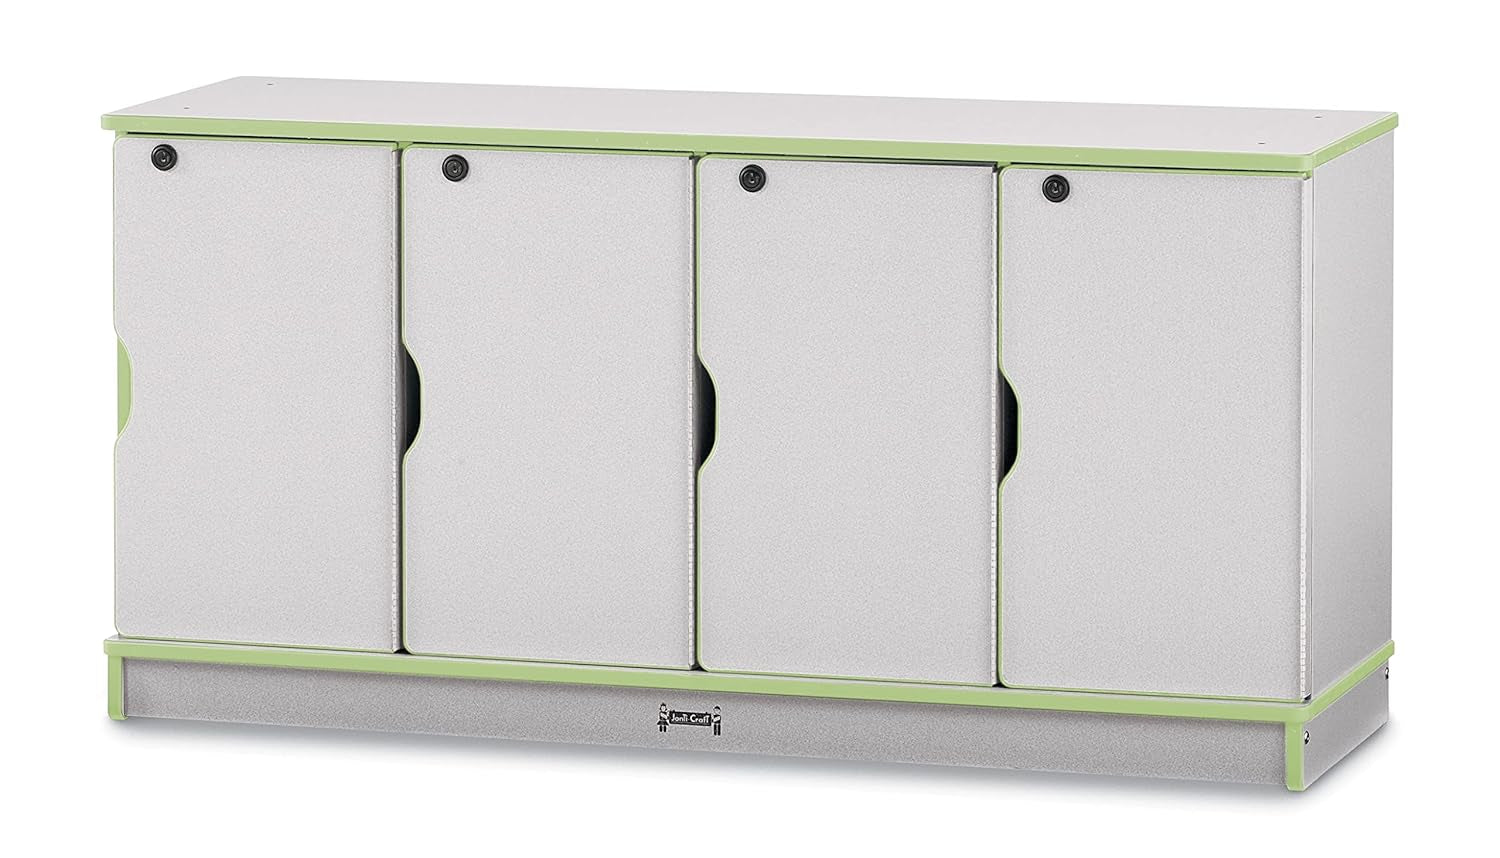 Rainbow Accents 4688JC130 Stacking Lockable Lockers - Single Stack - Key Lime Green, Large